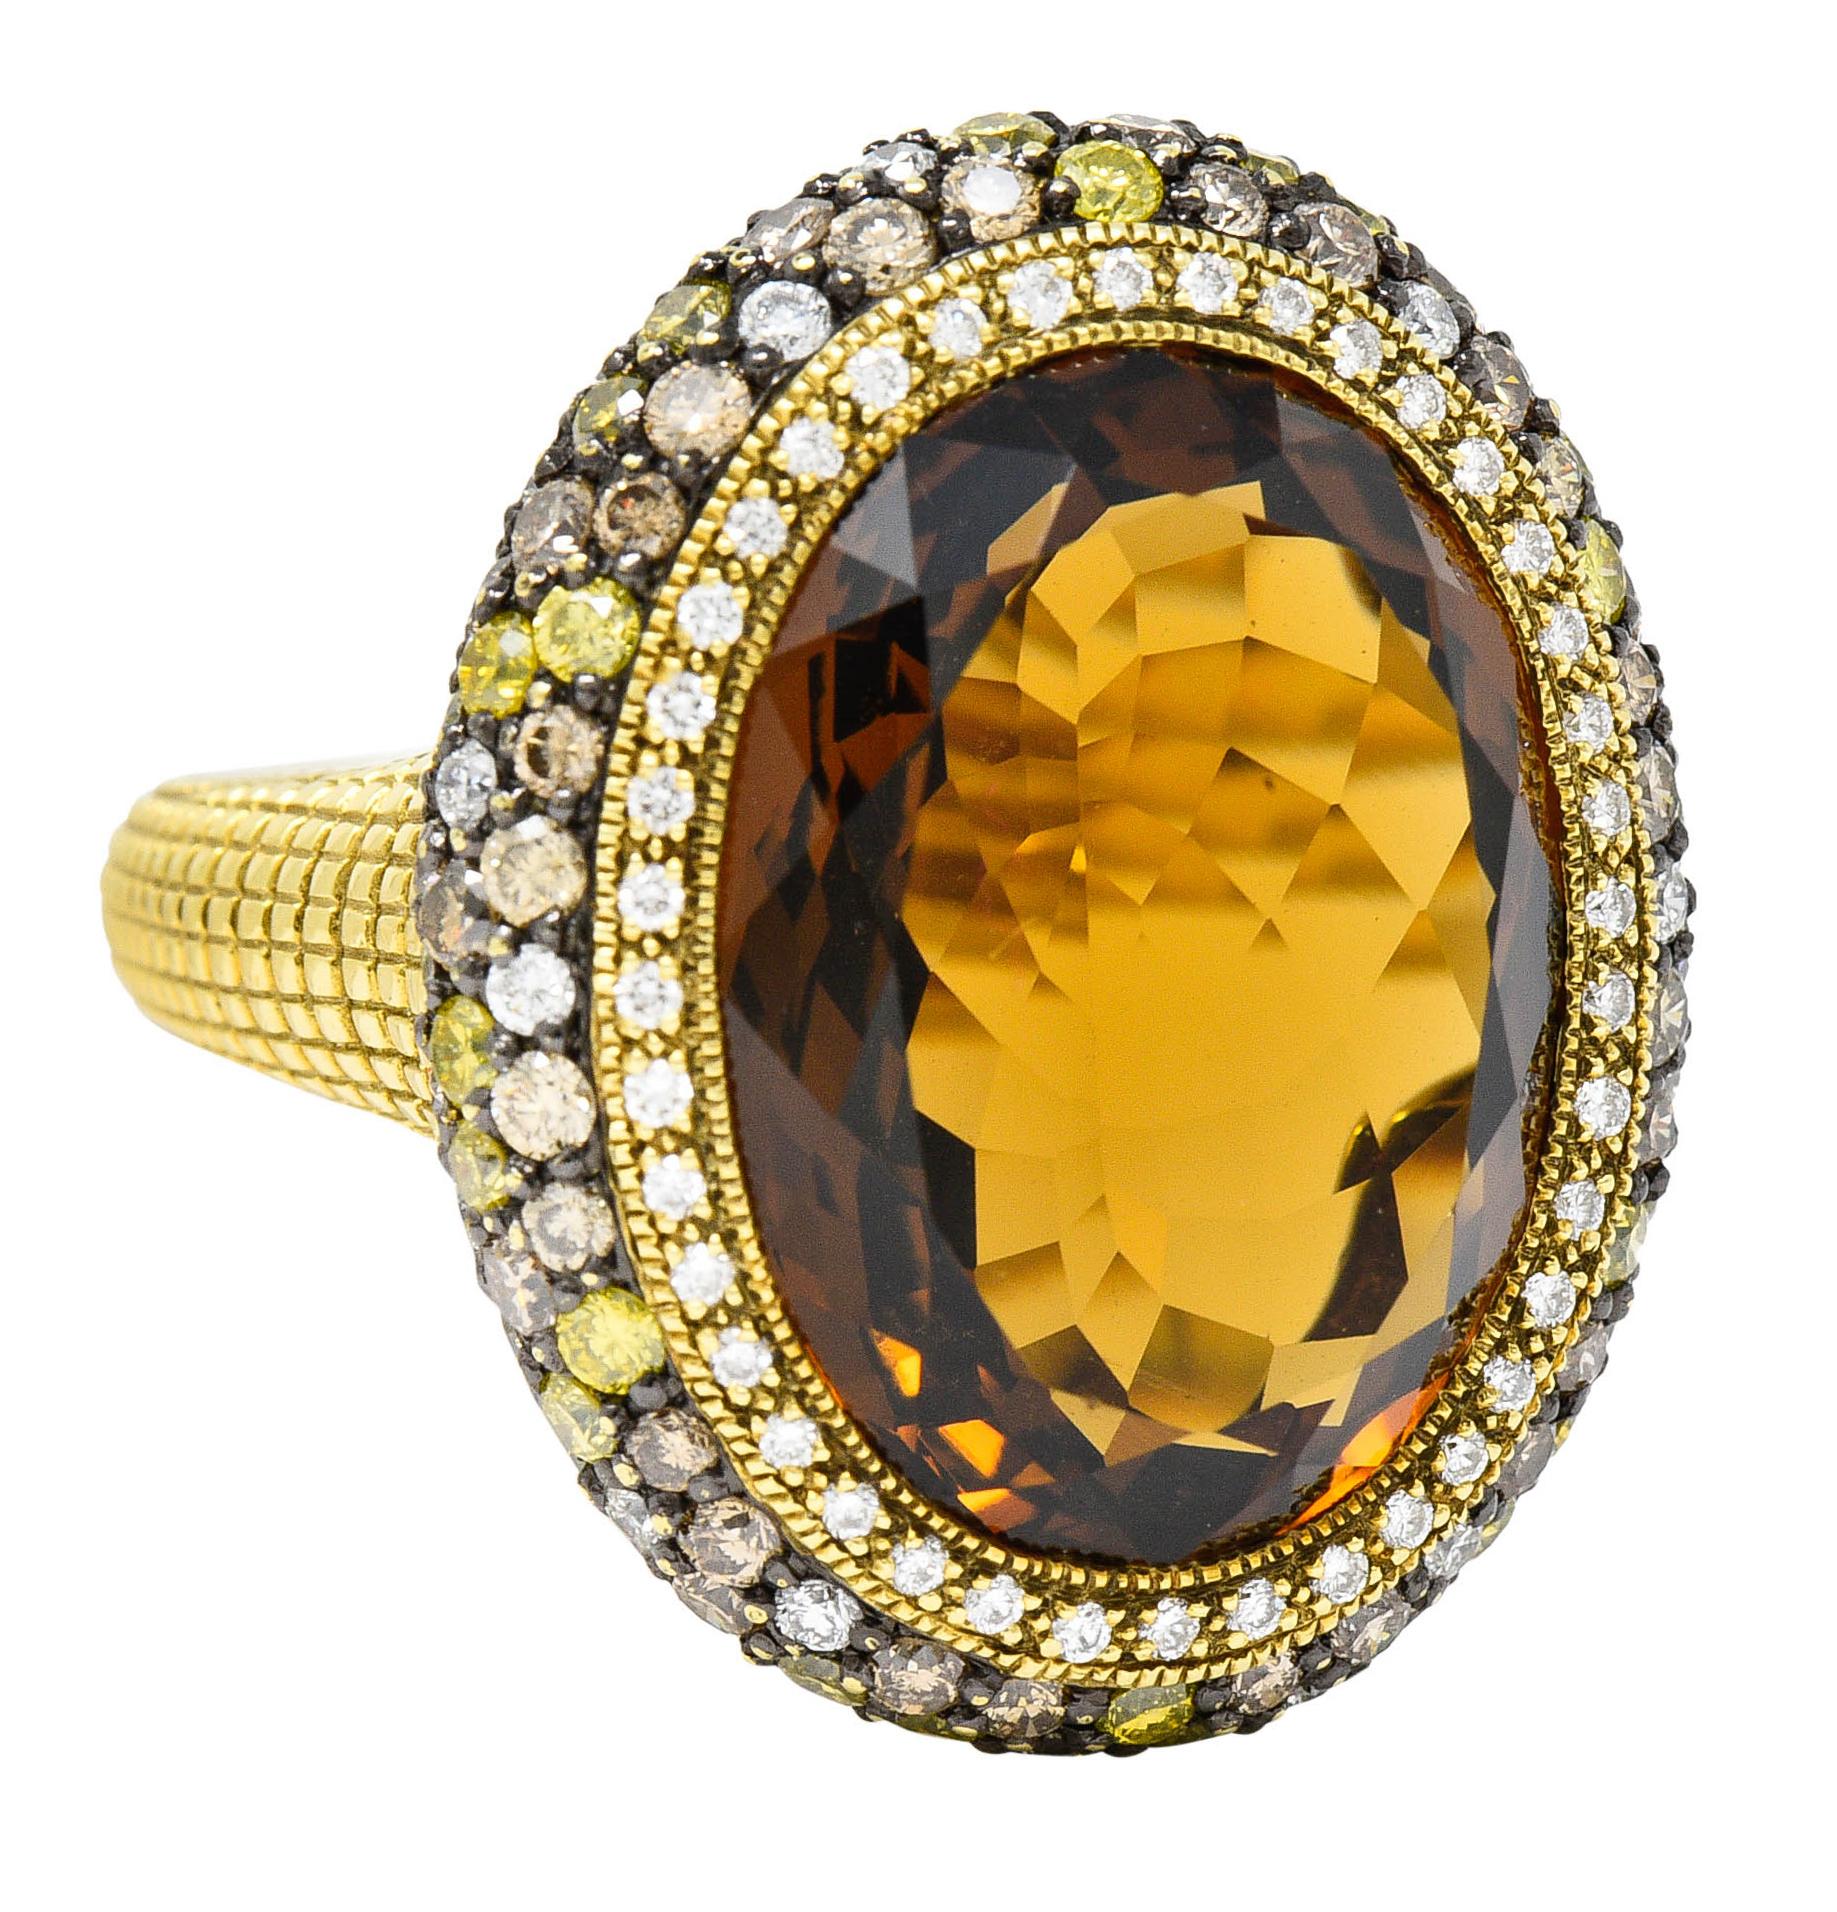 Features a mixed oval cut citrine measuring approximately 19.5 x 14.8 mm

Transparent with saturated and uniform brownish orange color

With a halo of round brilliant cut diamonds weighing in total approximately 0.50 carat

And a pavè set surround